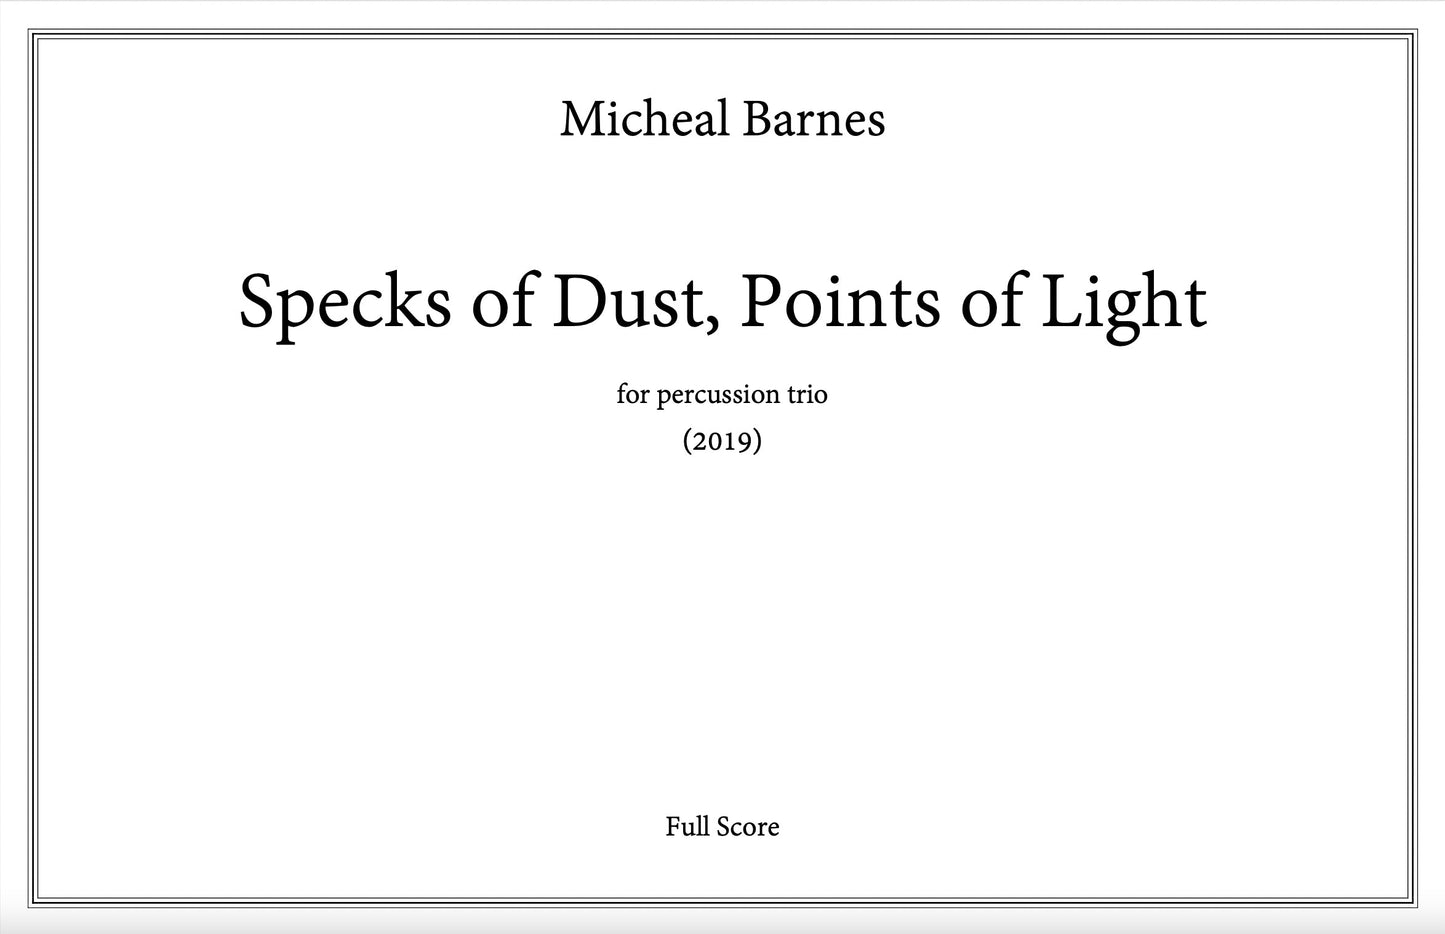 Specks of Dust, Points of Light by Micheal Barnes (DIGITAL DOWNLOAD)